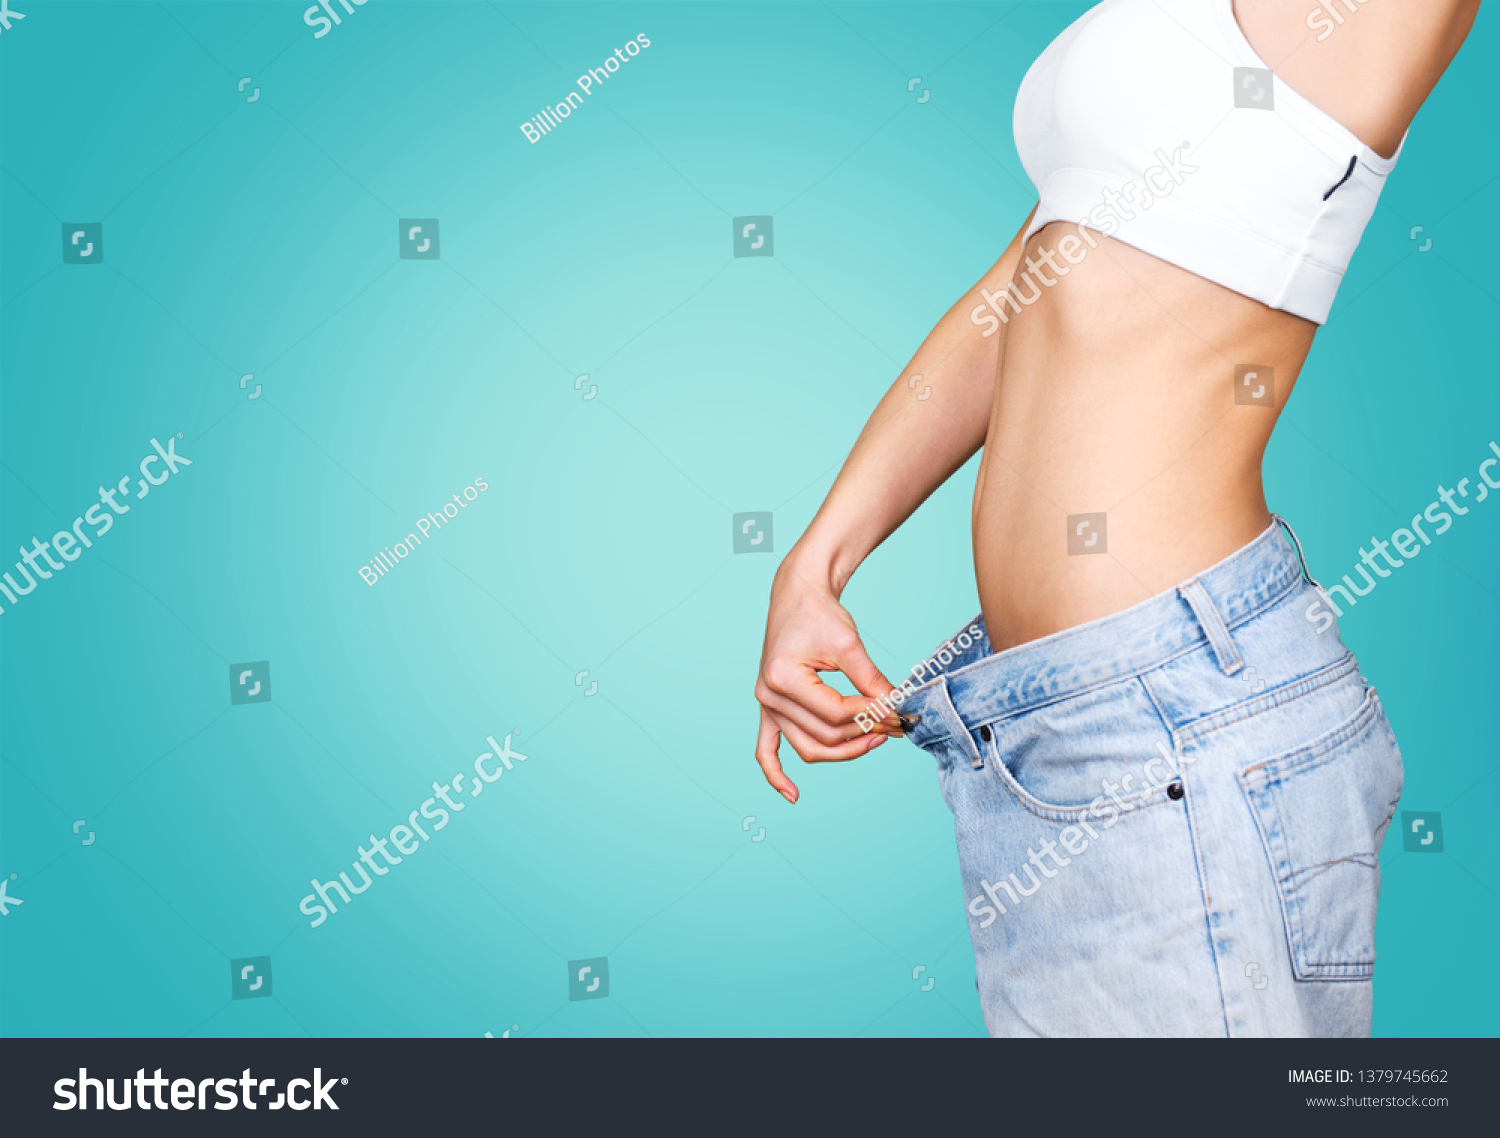 Health and beauty - woman in cotton underwear showing slimming concept #1379745662